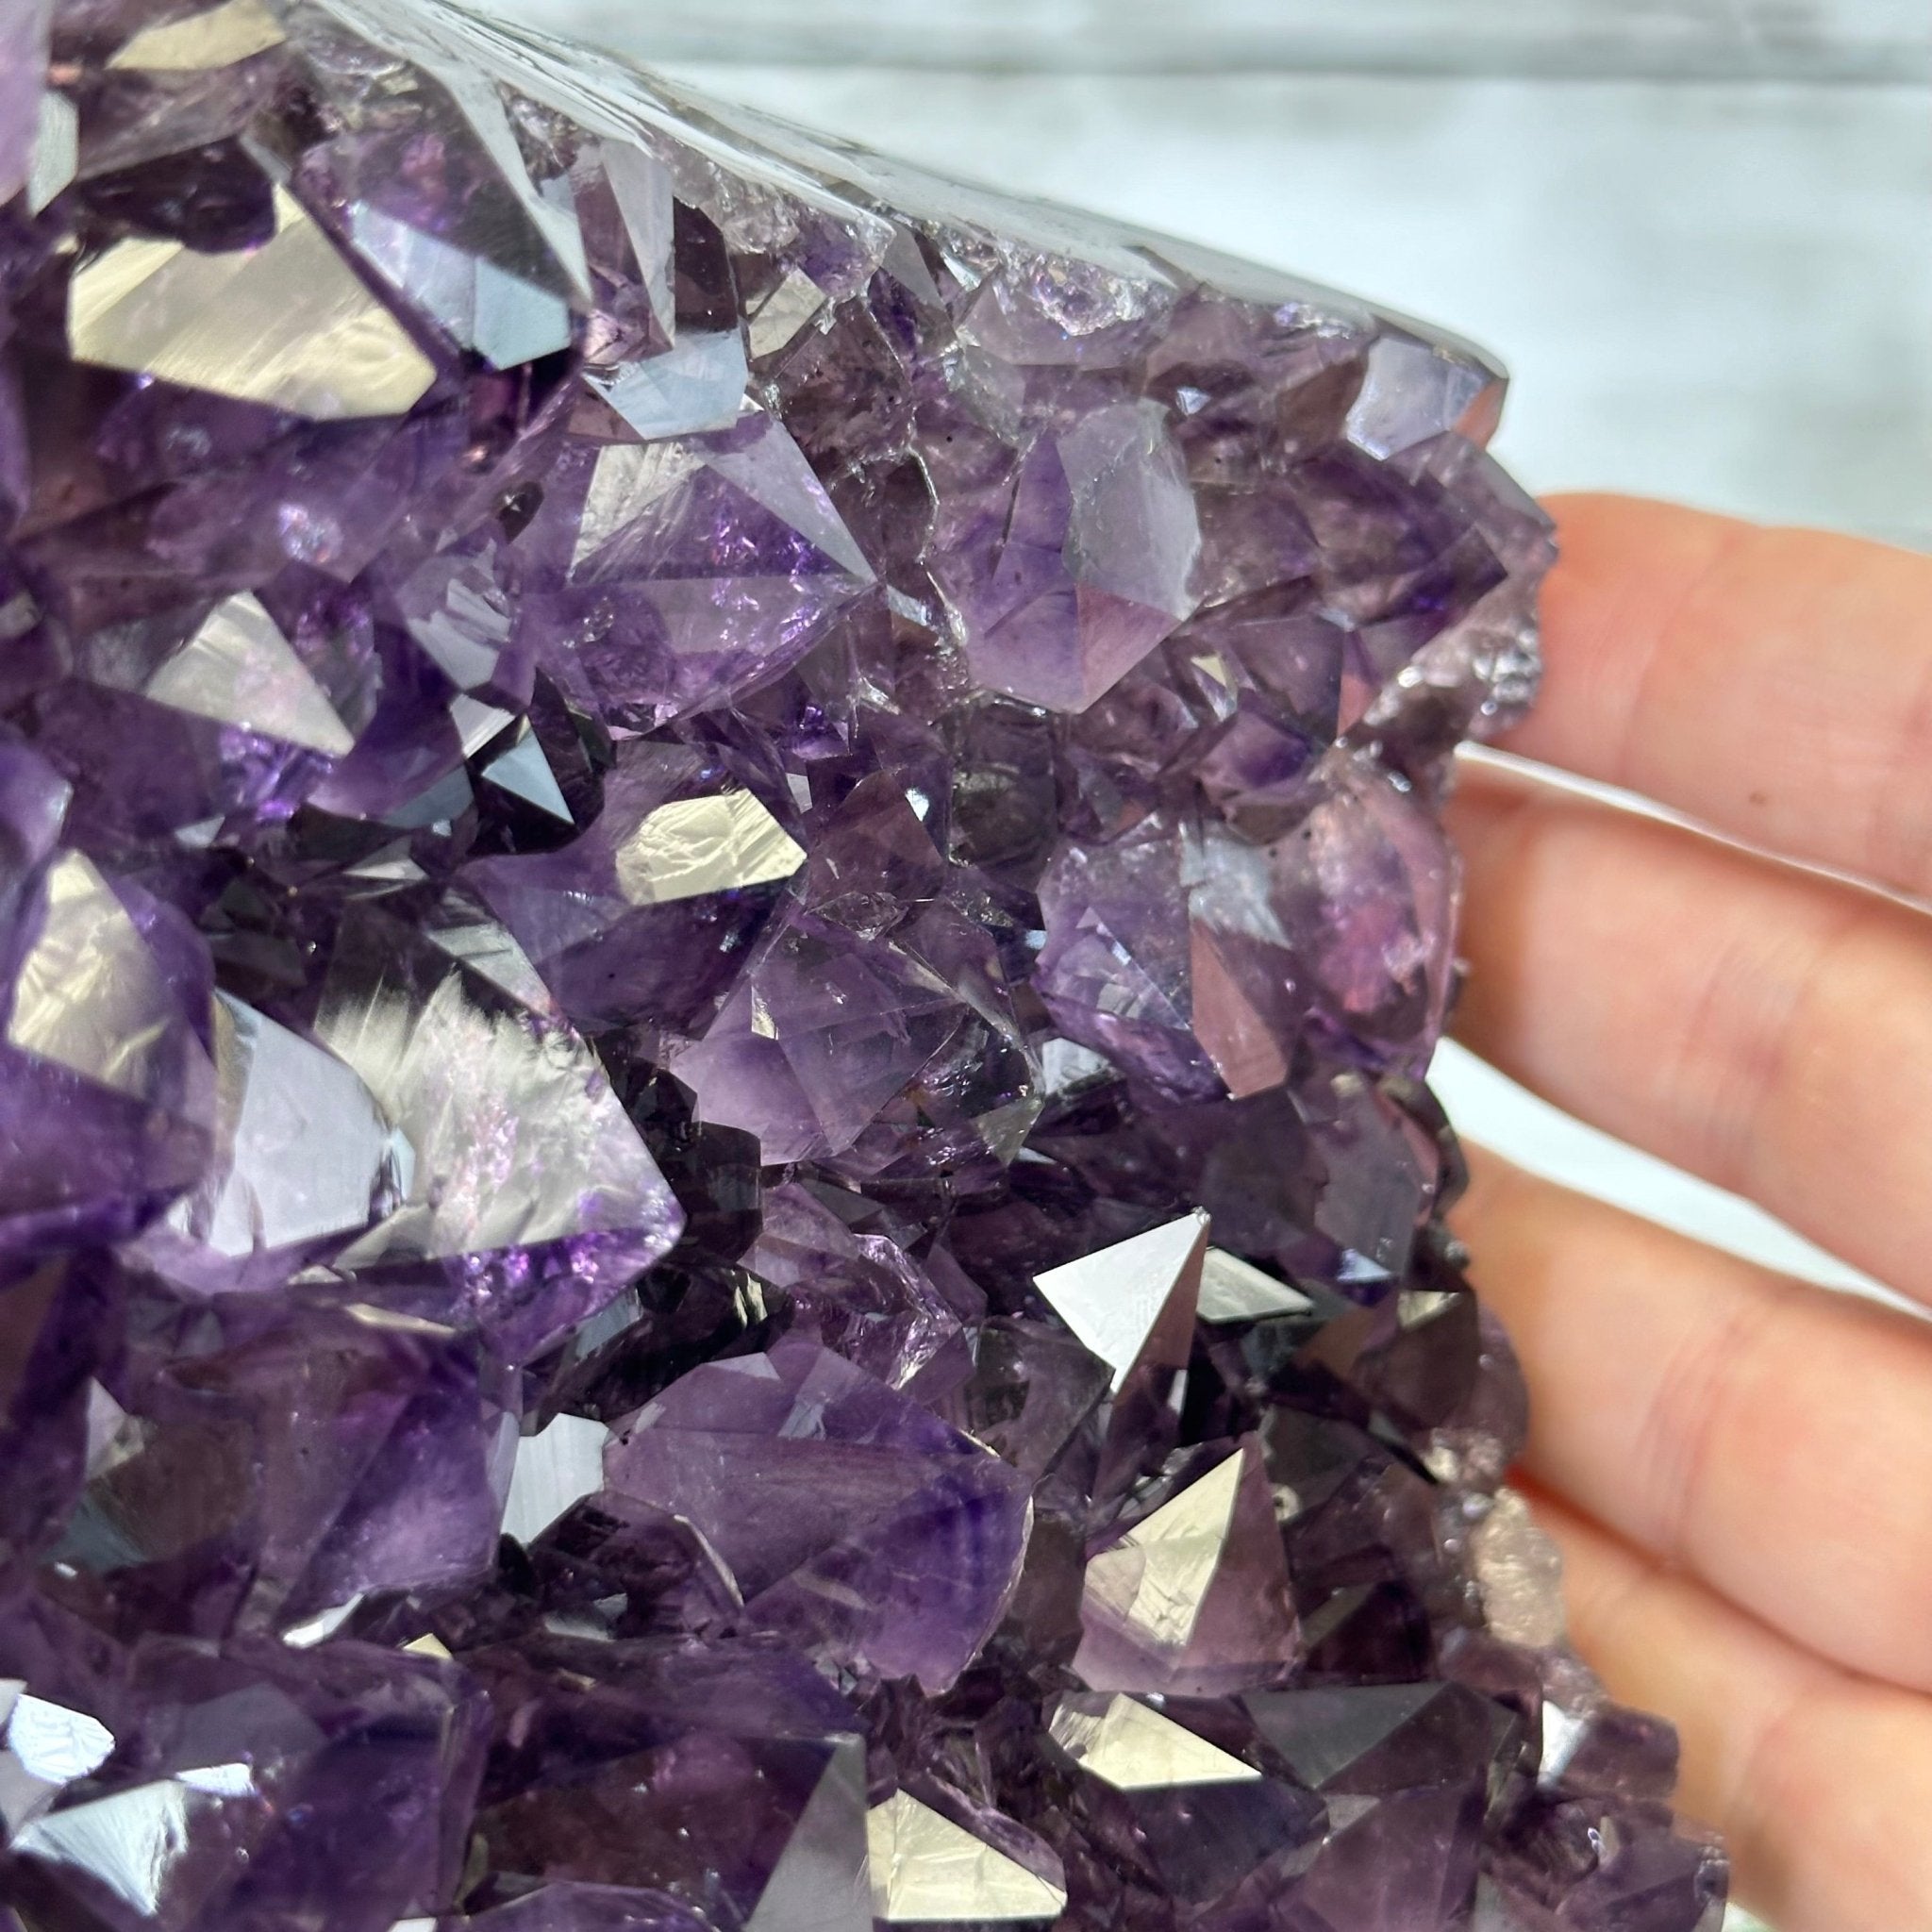 Extra Quality Amethyst Cluster, Cement Base, 10.75" Tall #5614-0113 - Brazil GemsBrazil GemsExtra Quality Amethyst Cluster, Cement Base, 10.75" Tall #5614-0113Clusters on Cement Bases5614-0113